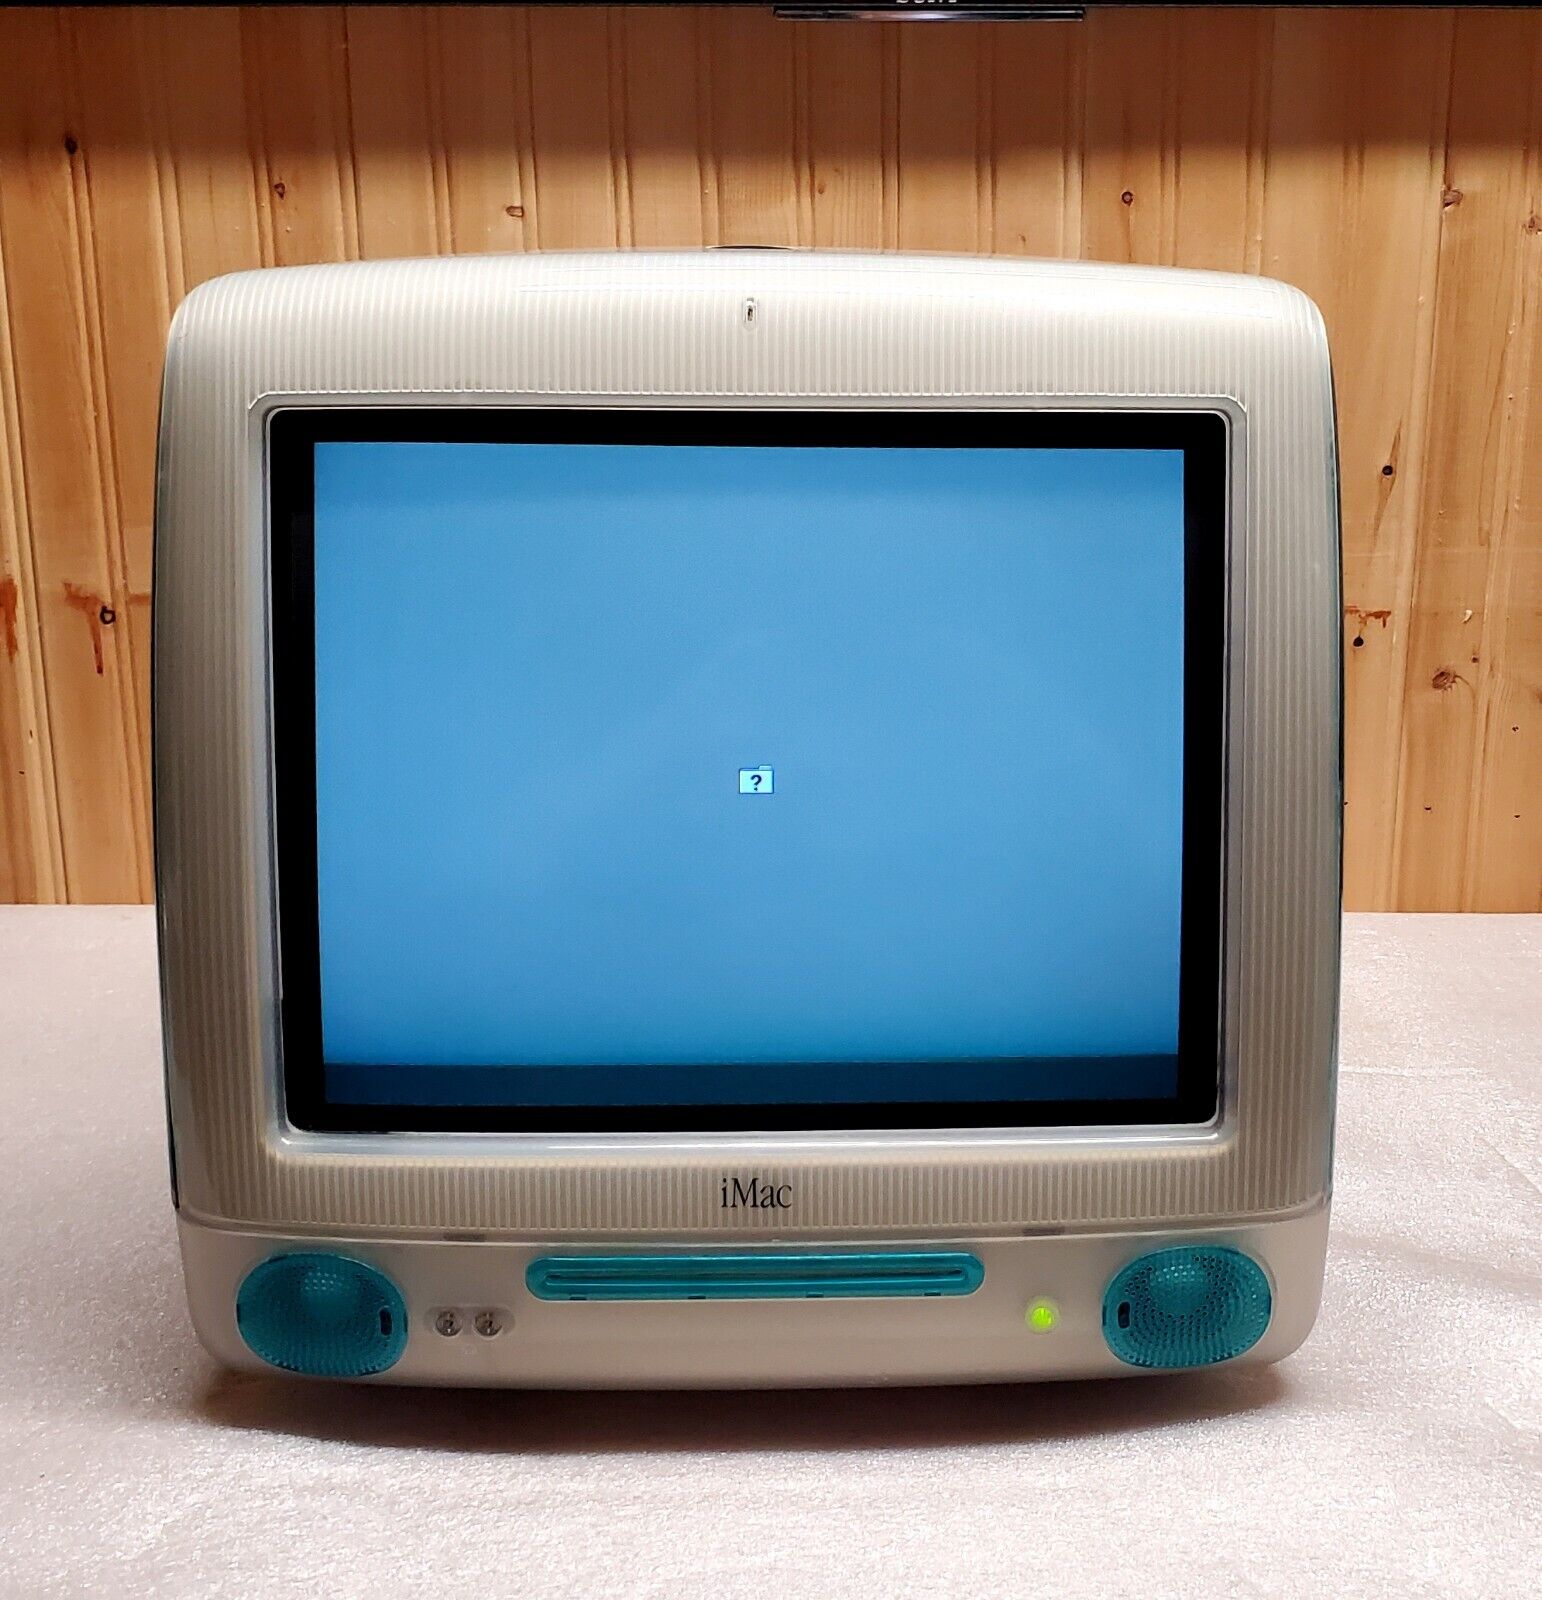 Vintage Apple iMac G3 M5521 Blueberry 350MHz 64MB Ram Working, No HDD